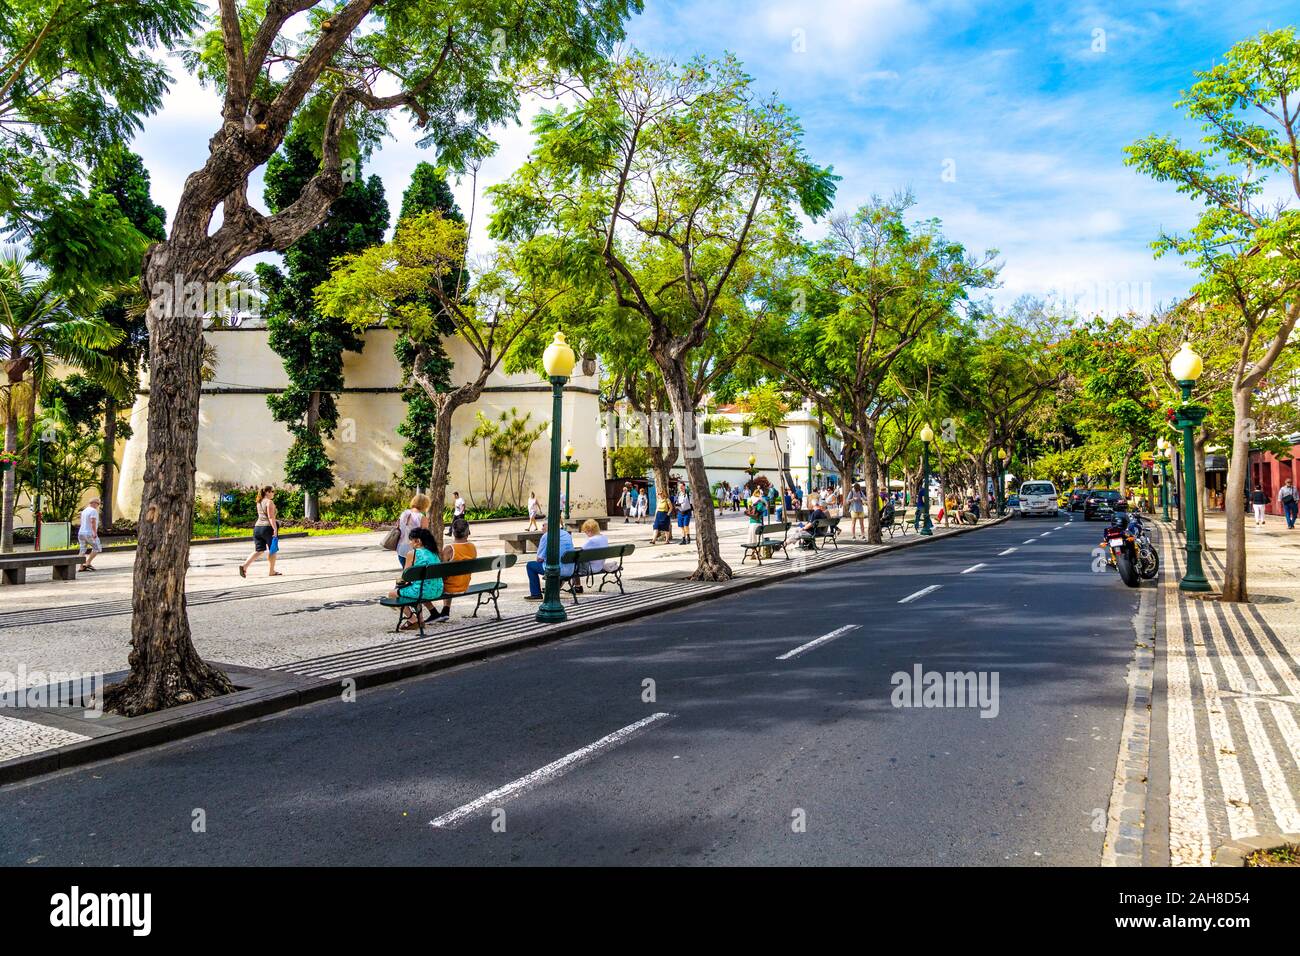 Tree-lined Avenida Arriaga in central Funchal, Madeira, Portugal Stock Photo